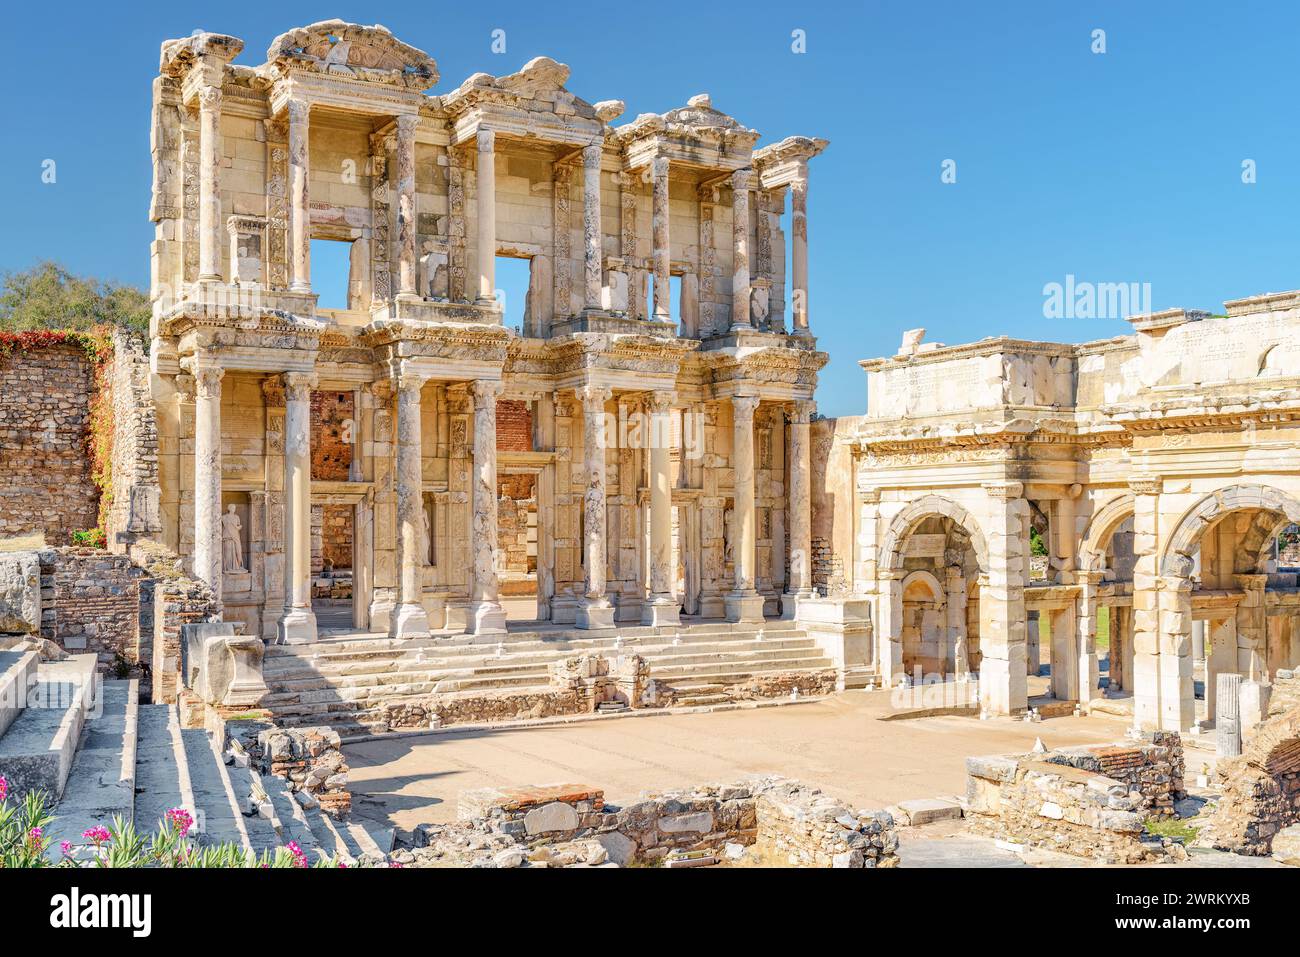 Selcuk, Turkey; March 13, 2024 - A view of the Greek ruins of Ephesus in Turkey showing the Gate of Augustus and Library of Celsus. Stock Photo